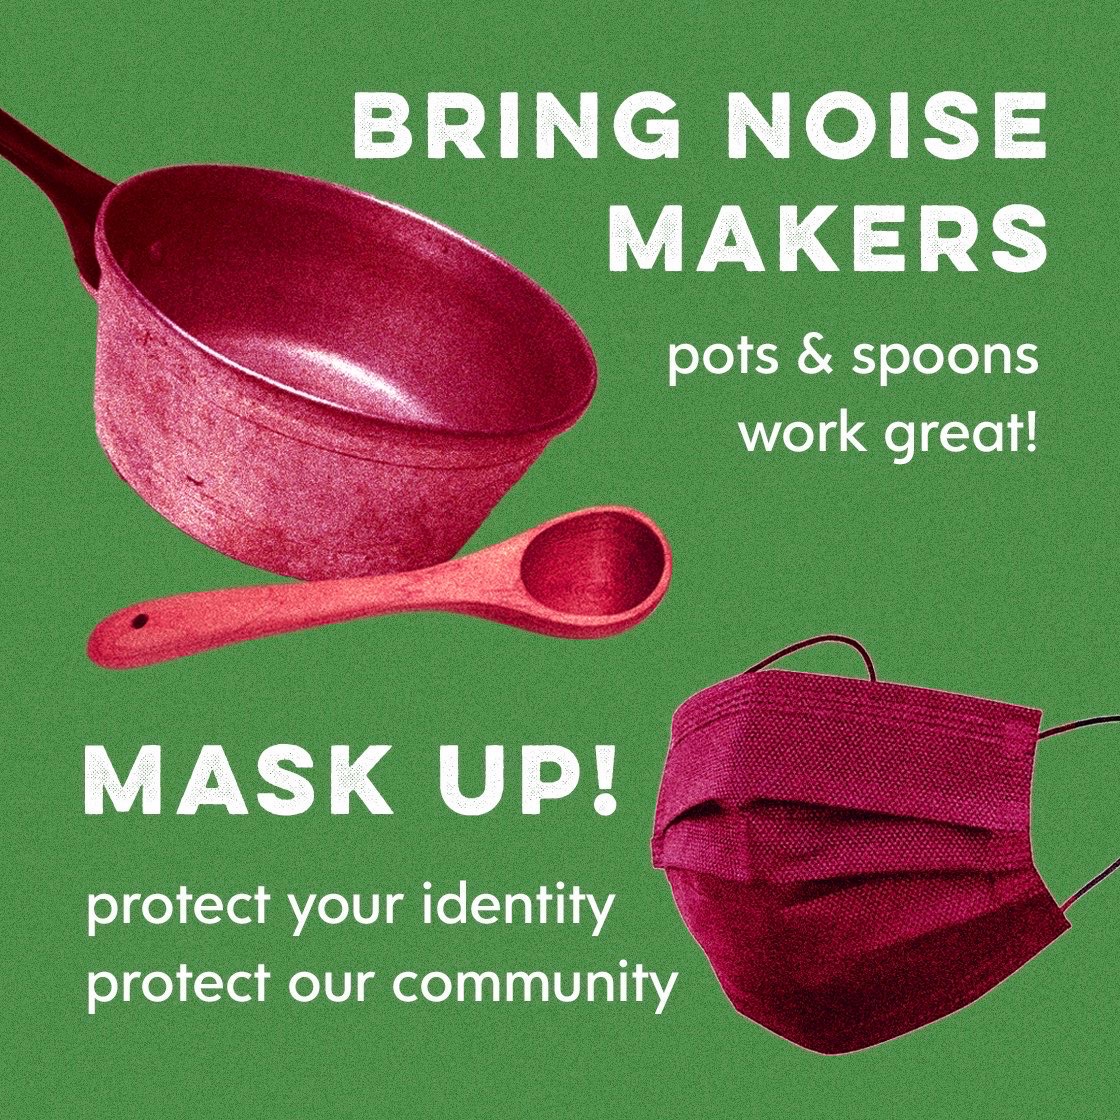 🚨Important info for this Saturday’s action🚨 : —>Bring noise makers! Pots, pans wooden spoons, & anything else you have that will help you be VERY LOUD! —>Wear a mask throughout the action! We will have extra masks for those who need them. See you there! 🇵🇸